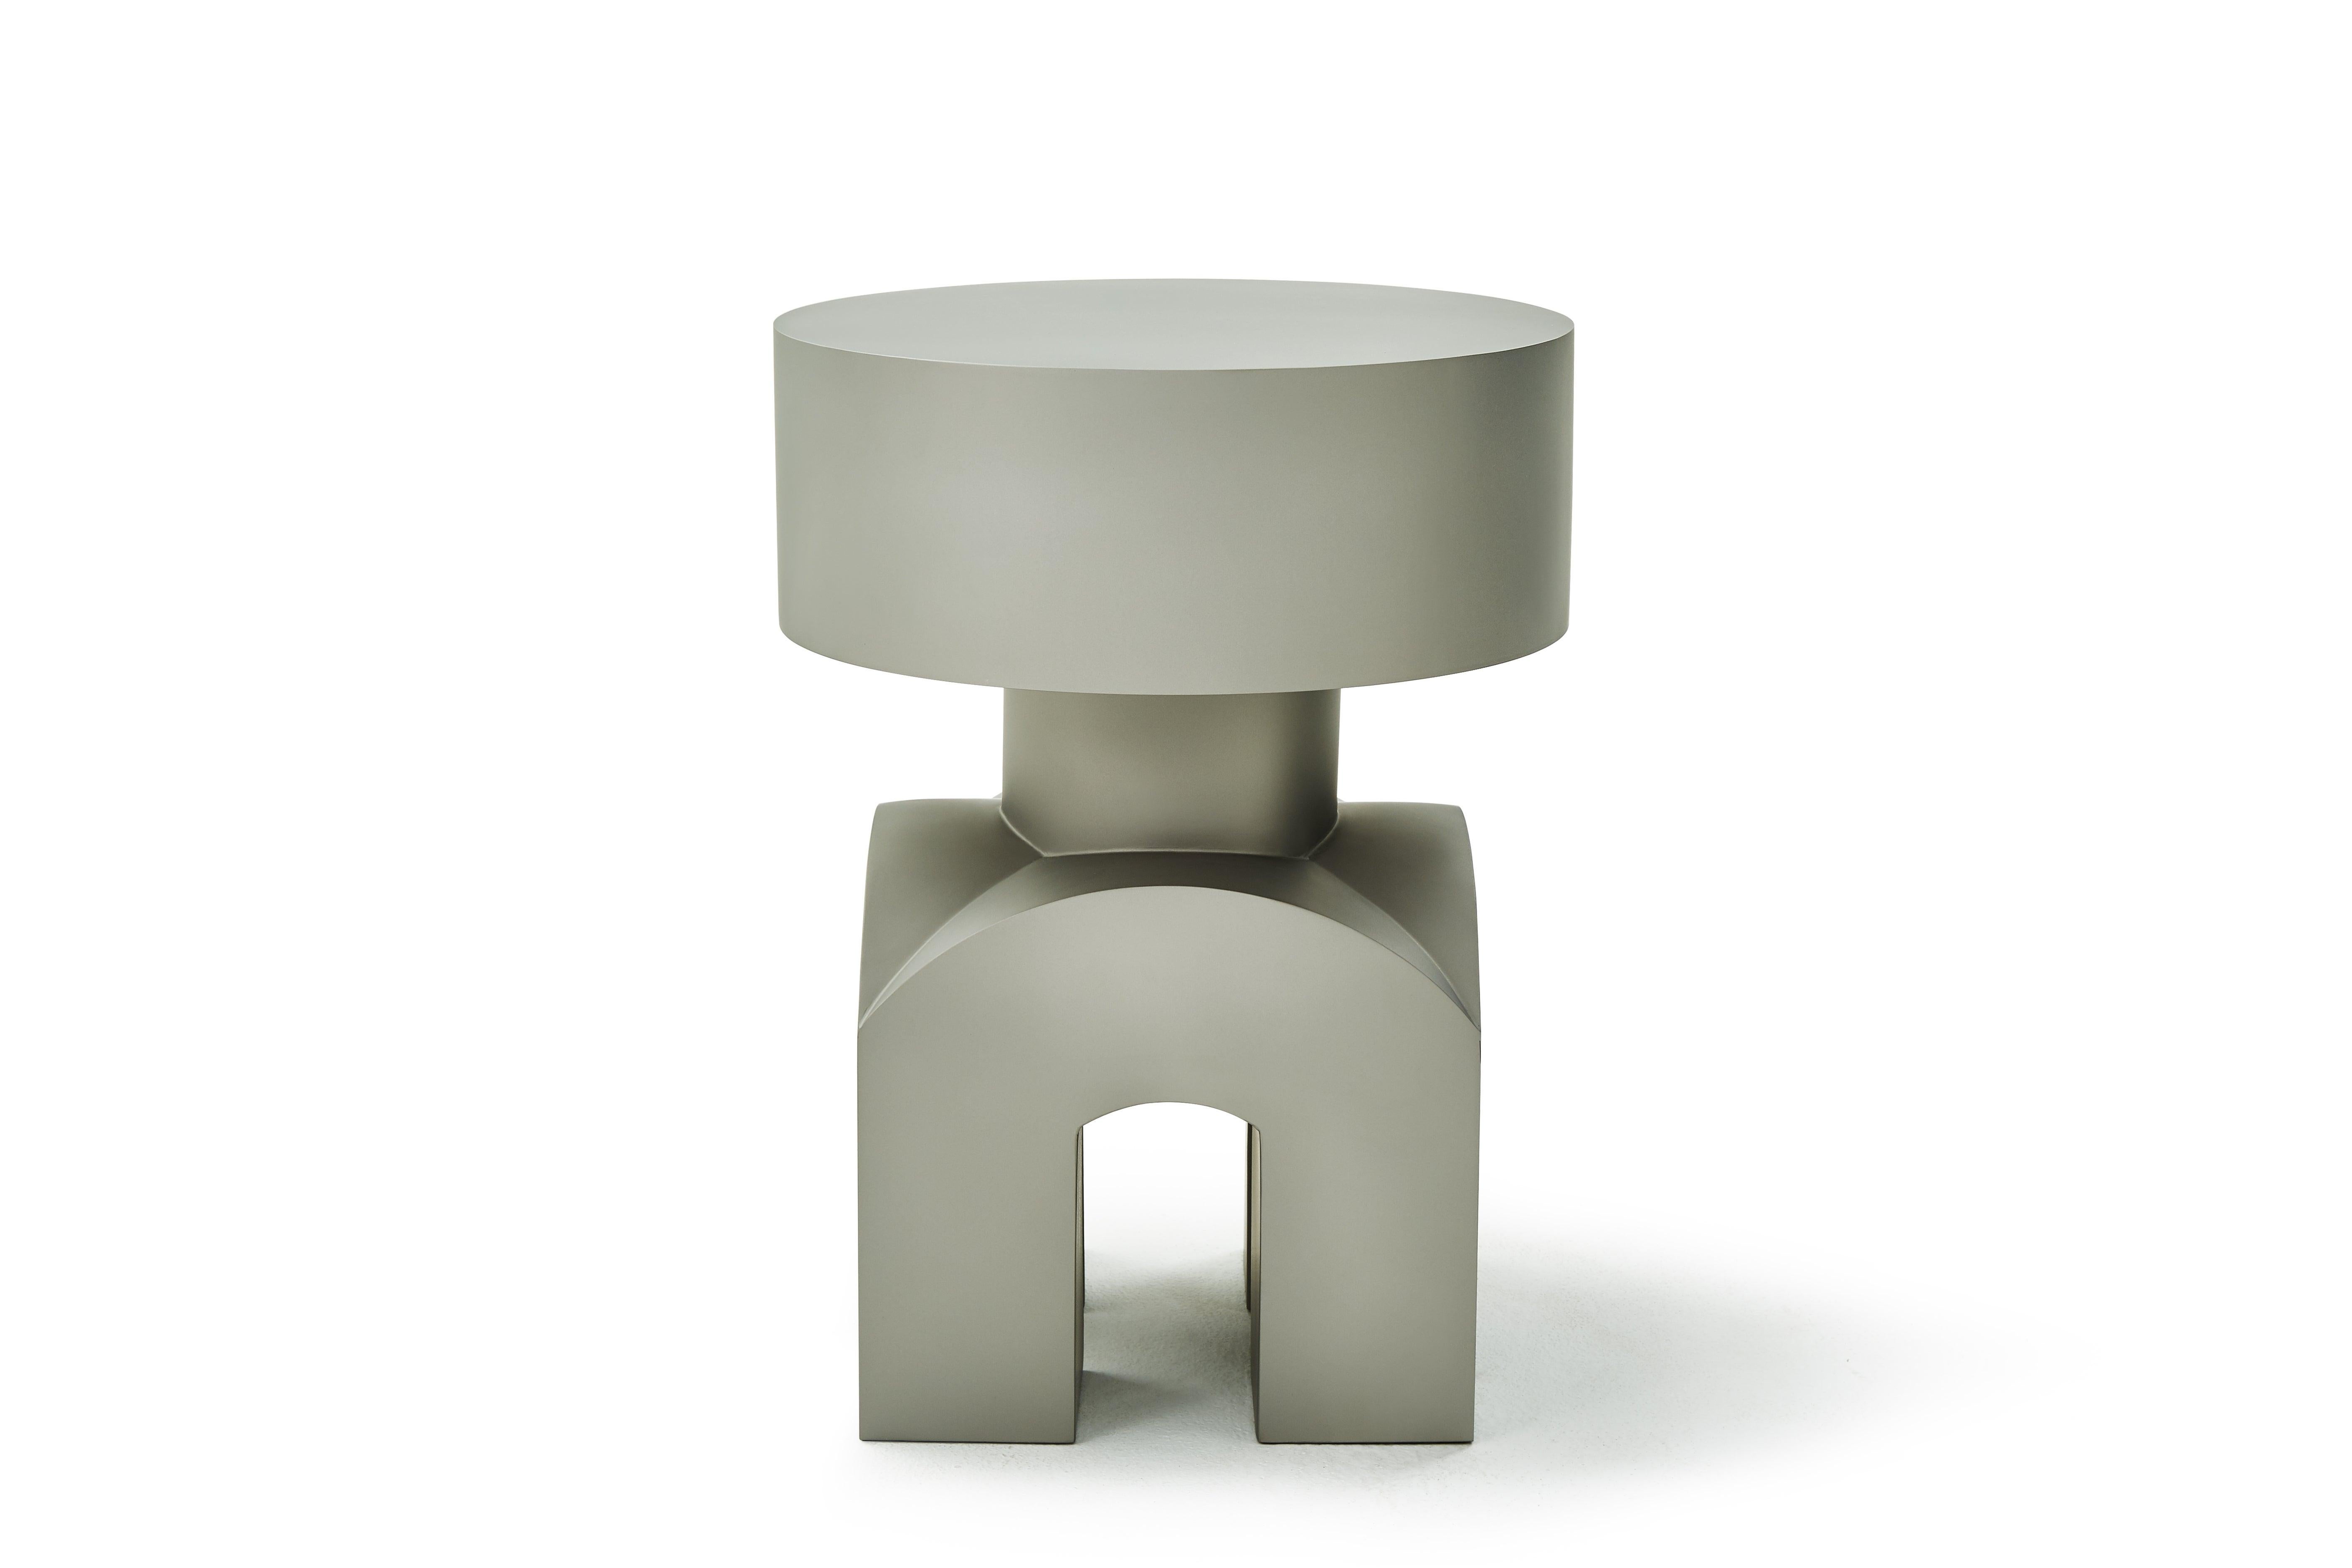 This sculptural side table is from the Studio Brancusi Collection designed and made by China-based artist Danjie Yan. The works debutted at Sifang Art Museum at Nanjing, China.

Danjie was inspired by the Pioneer of modern sculpture Constantin